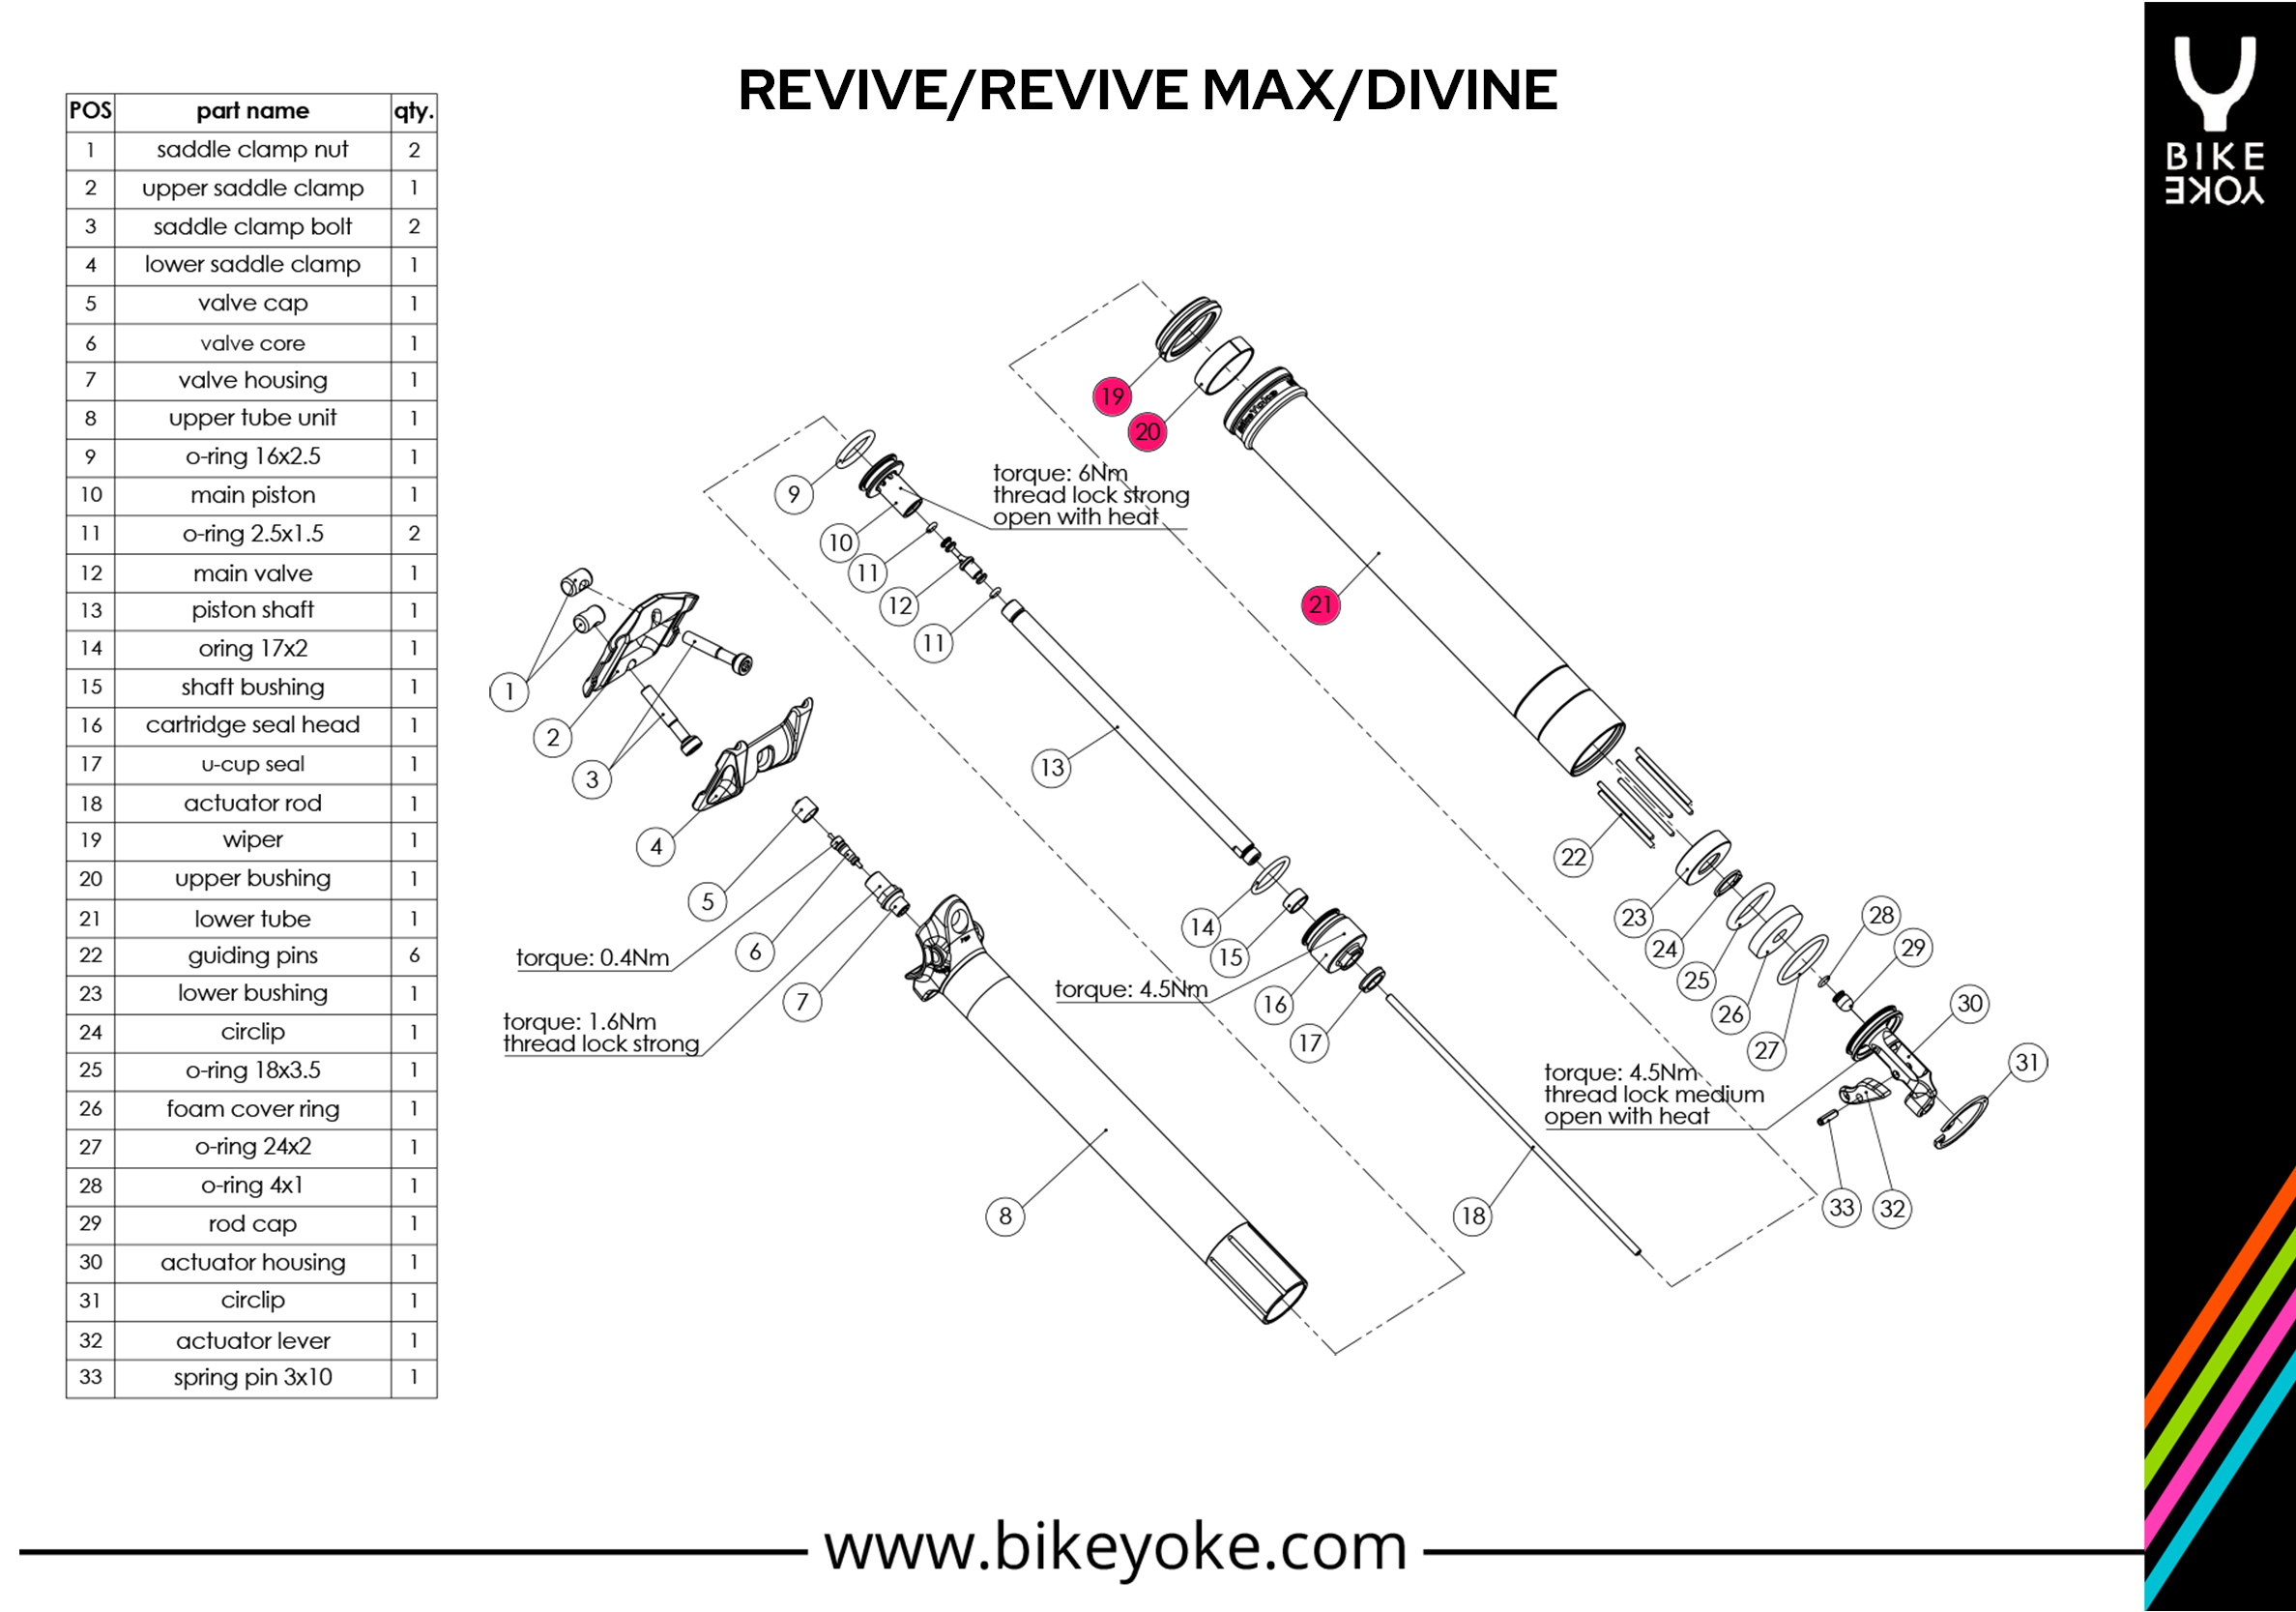 REVIVE MAX - lower tube